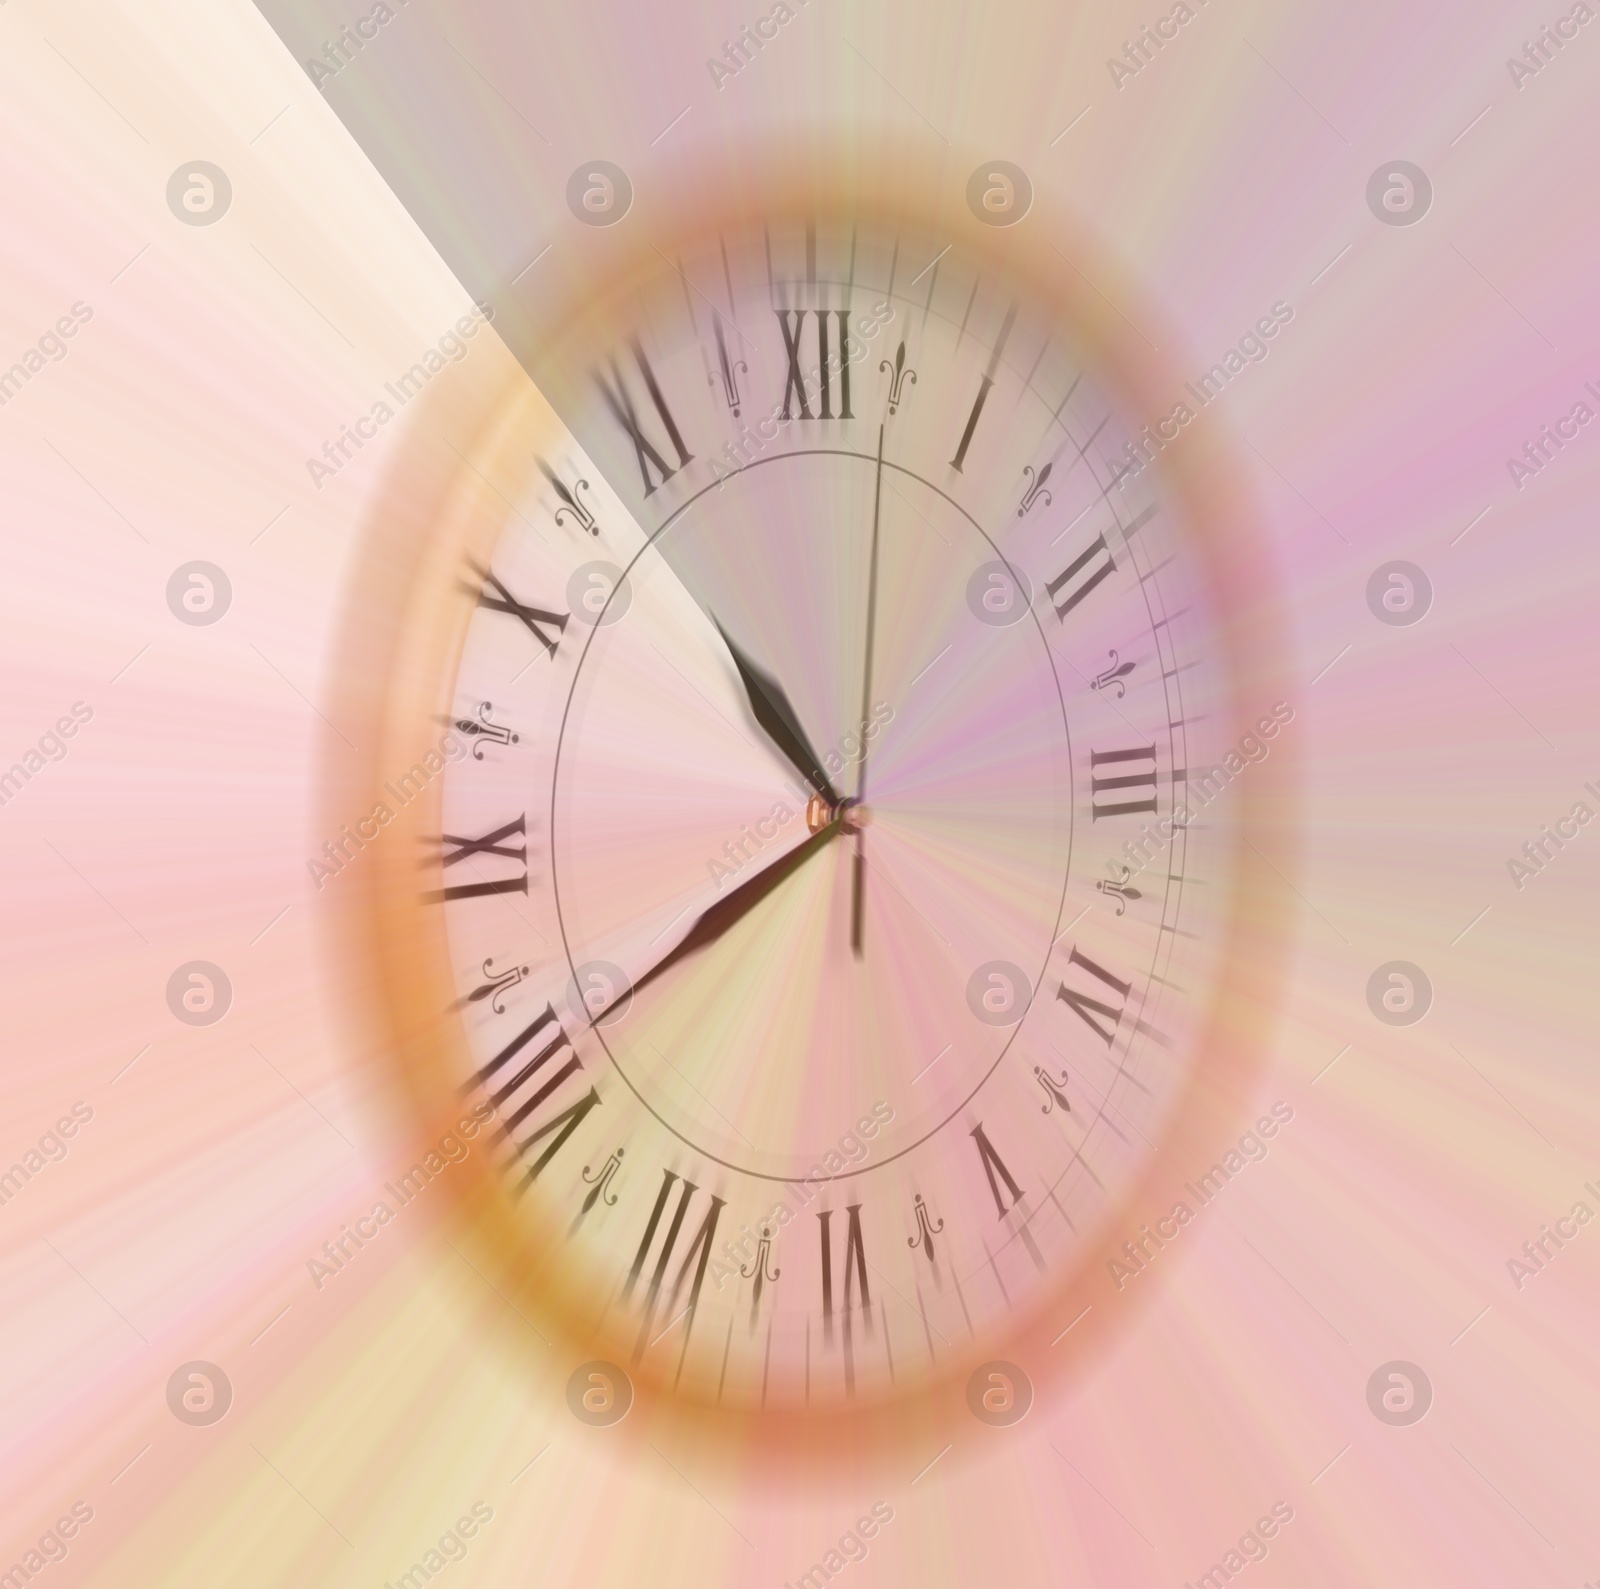 Image of Clock with roman numerals, motion blur effect. Time concept